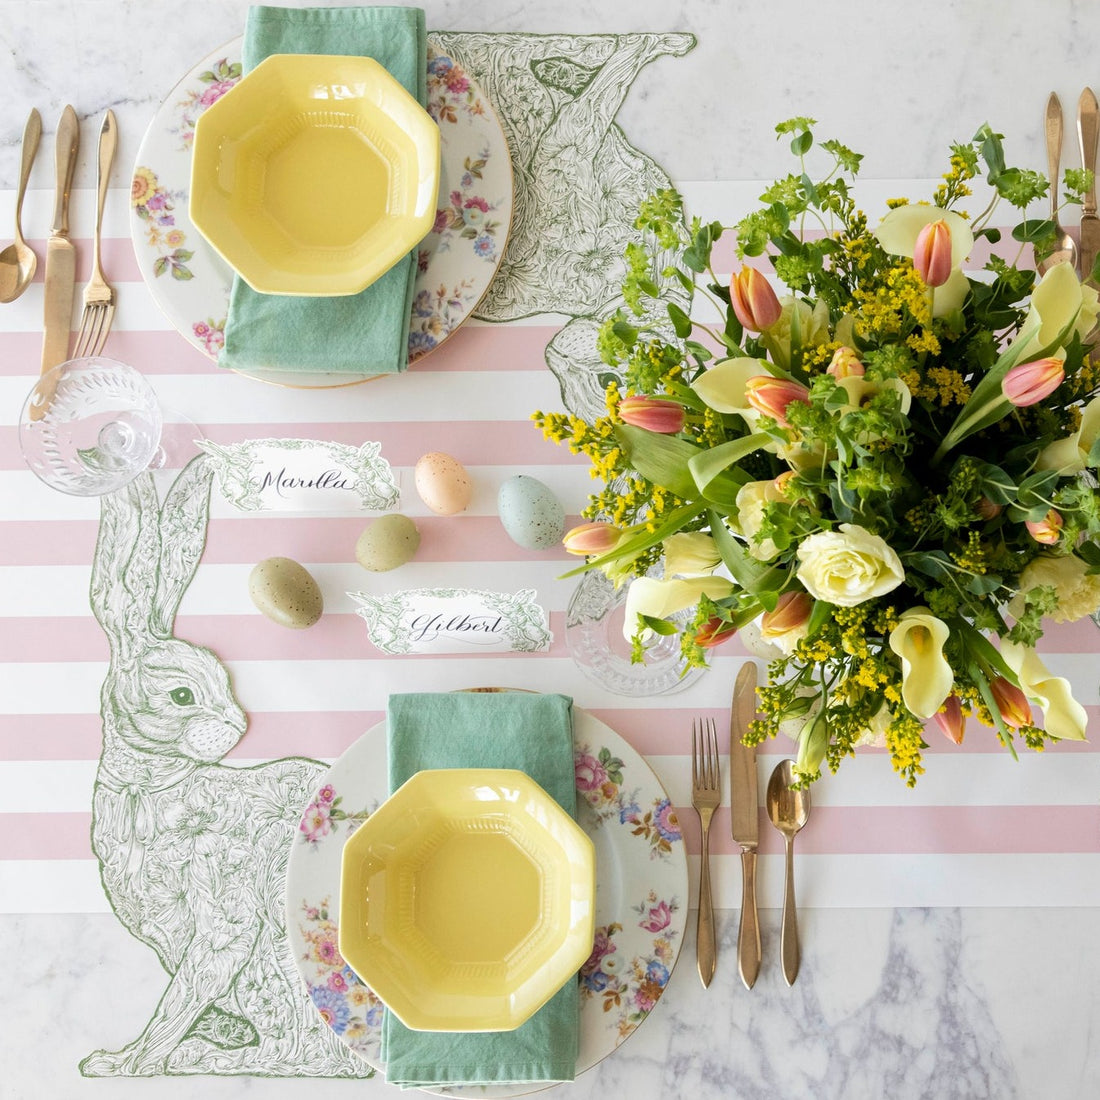 The Die-cut Greenhouse Hare Placemat under an elegant Easter table setting for two, from above.